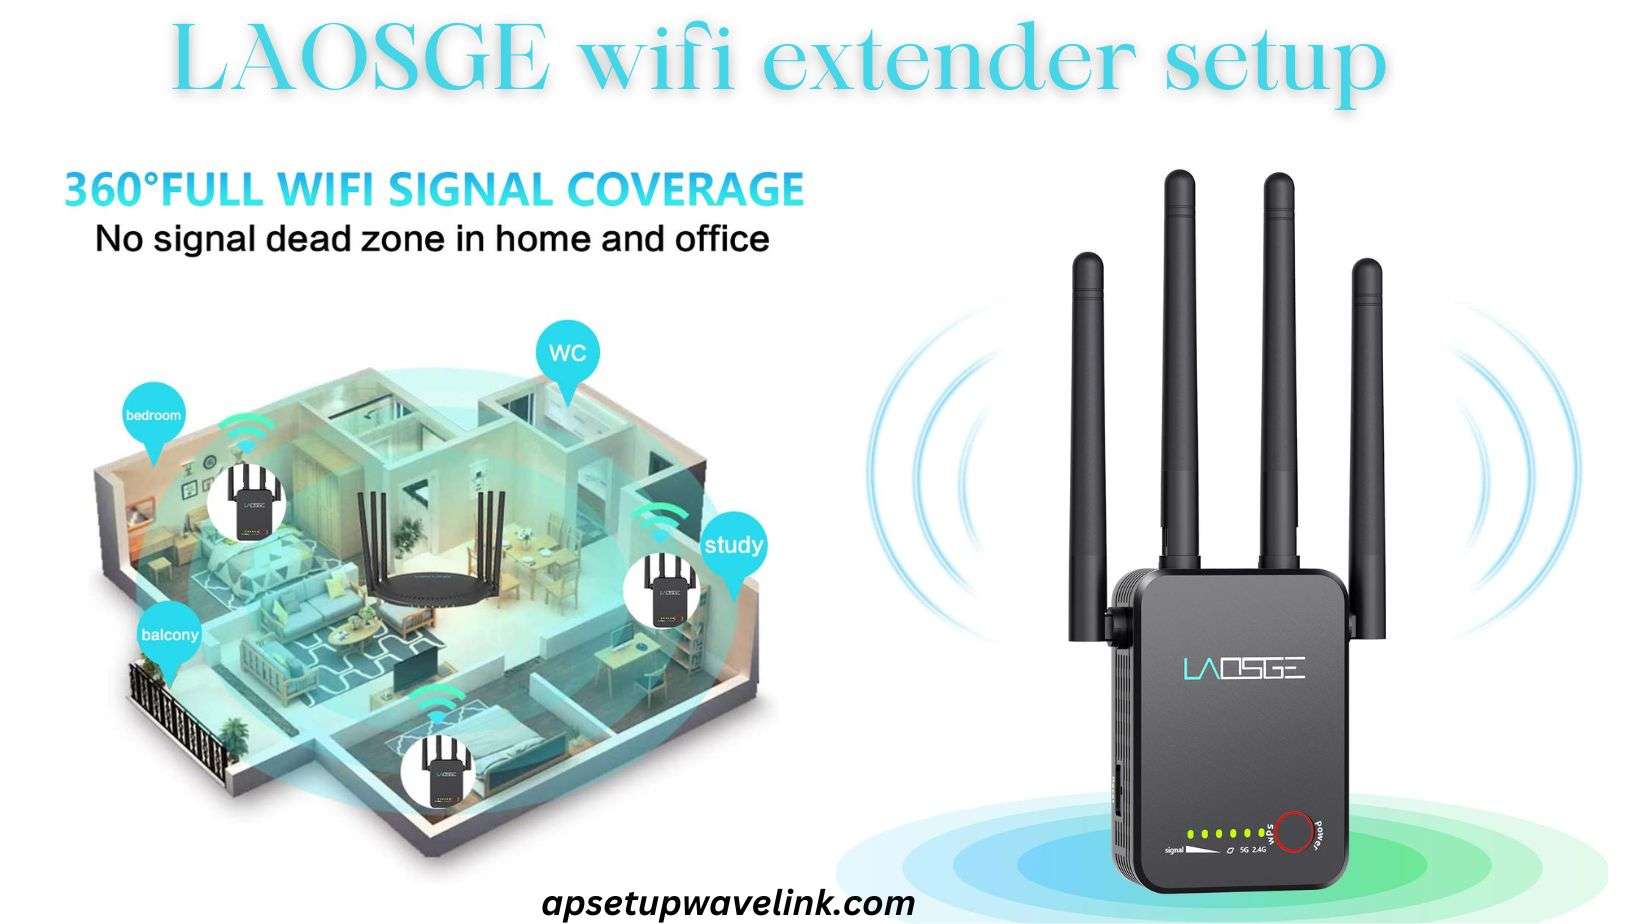 You are currently viewing LAOSGE wifi extender setup